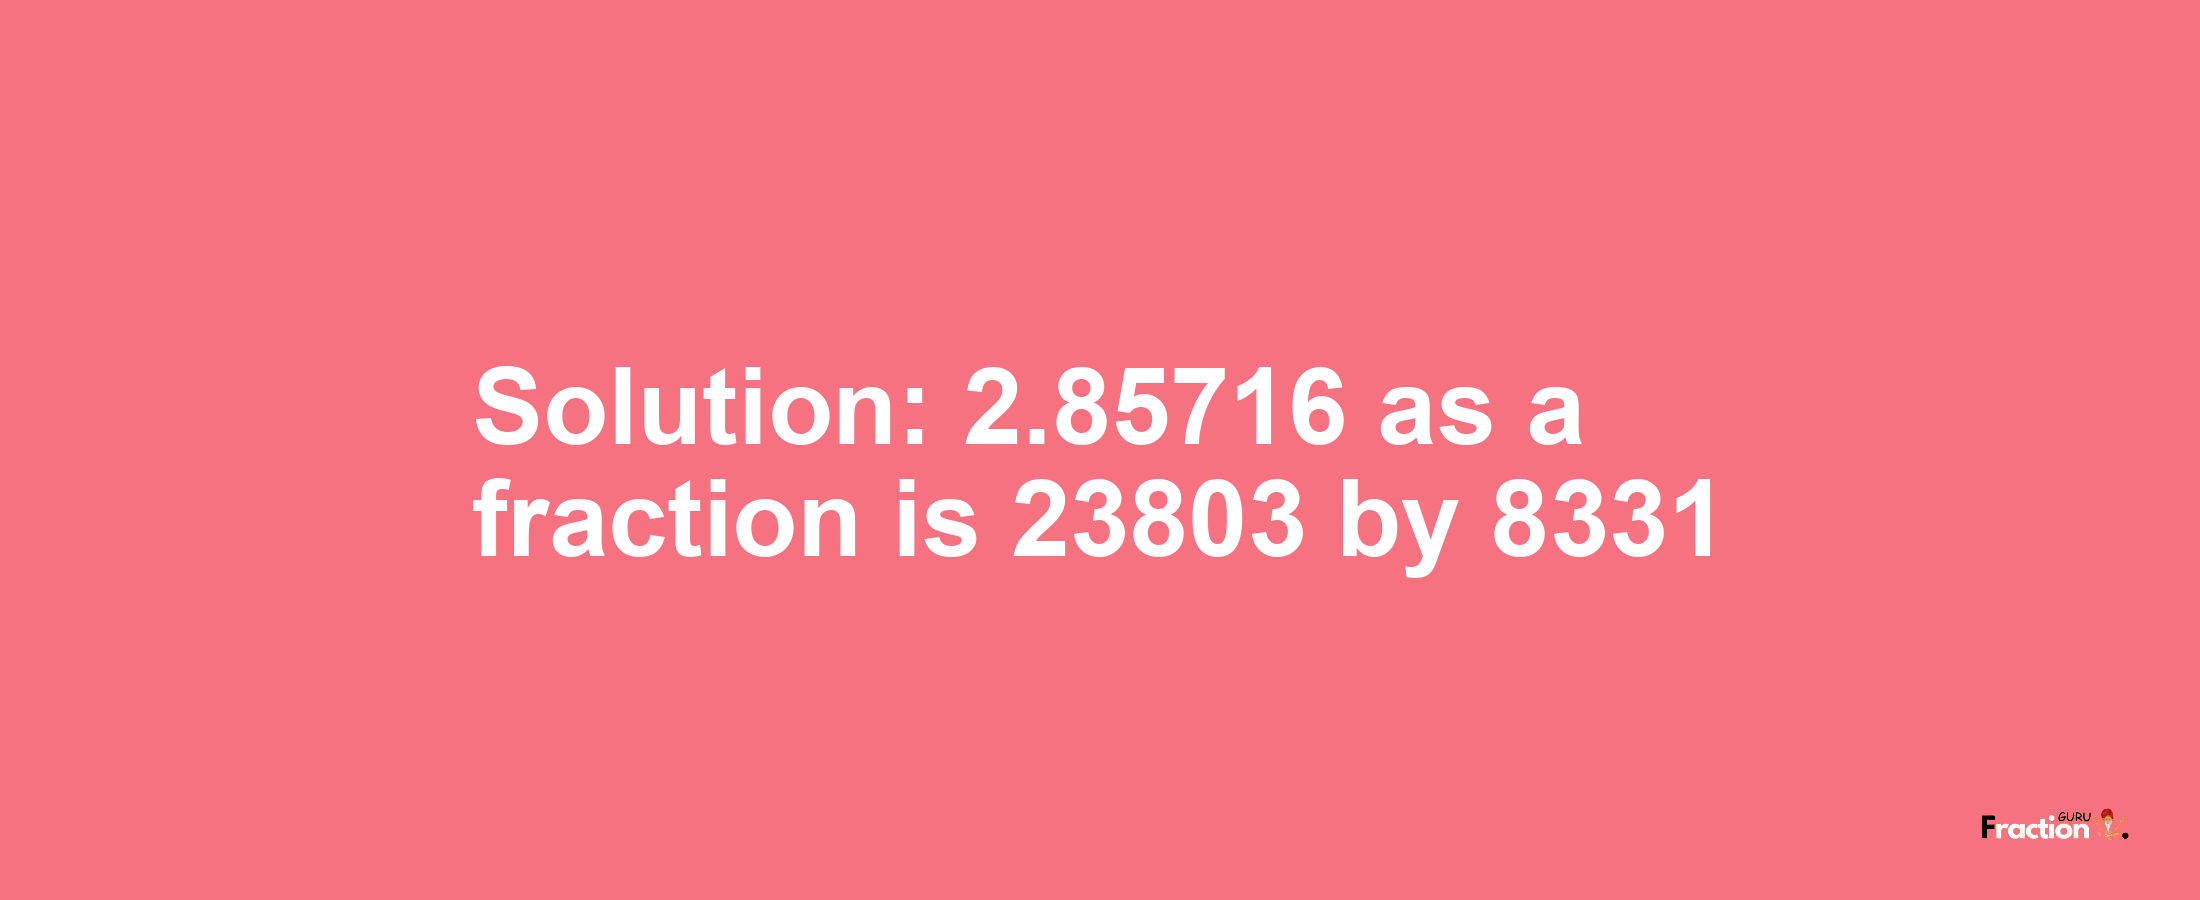 Solution:2.85716 as a fraction is 23803/8331